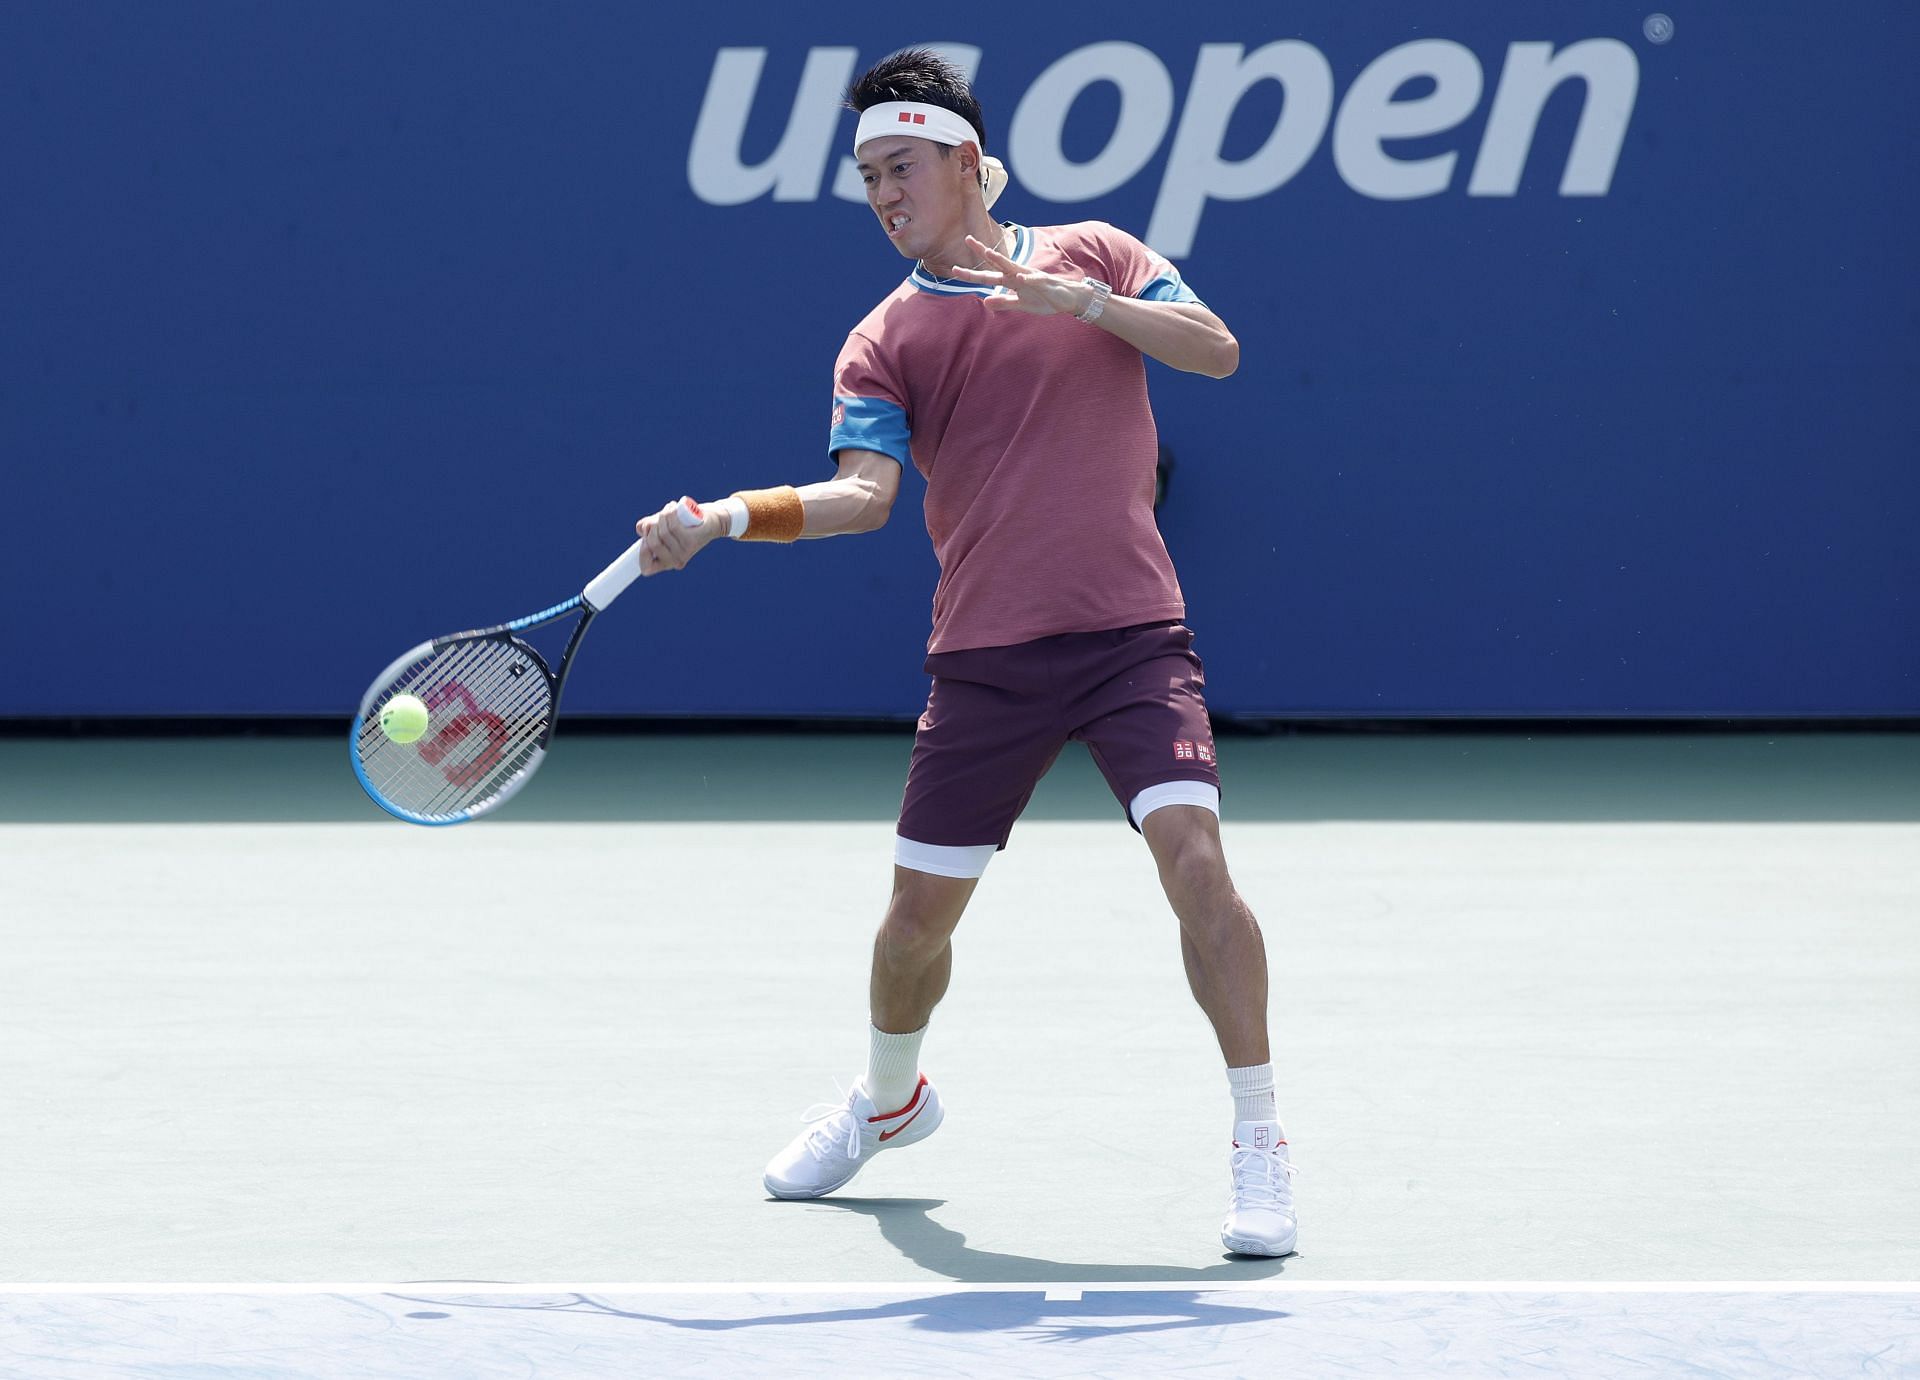 Kei Nishikori reached a career-high ranking of No. 4 in March 2015.